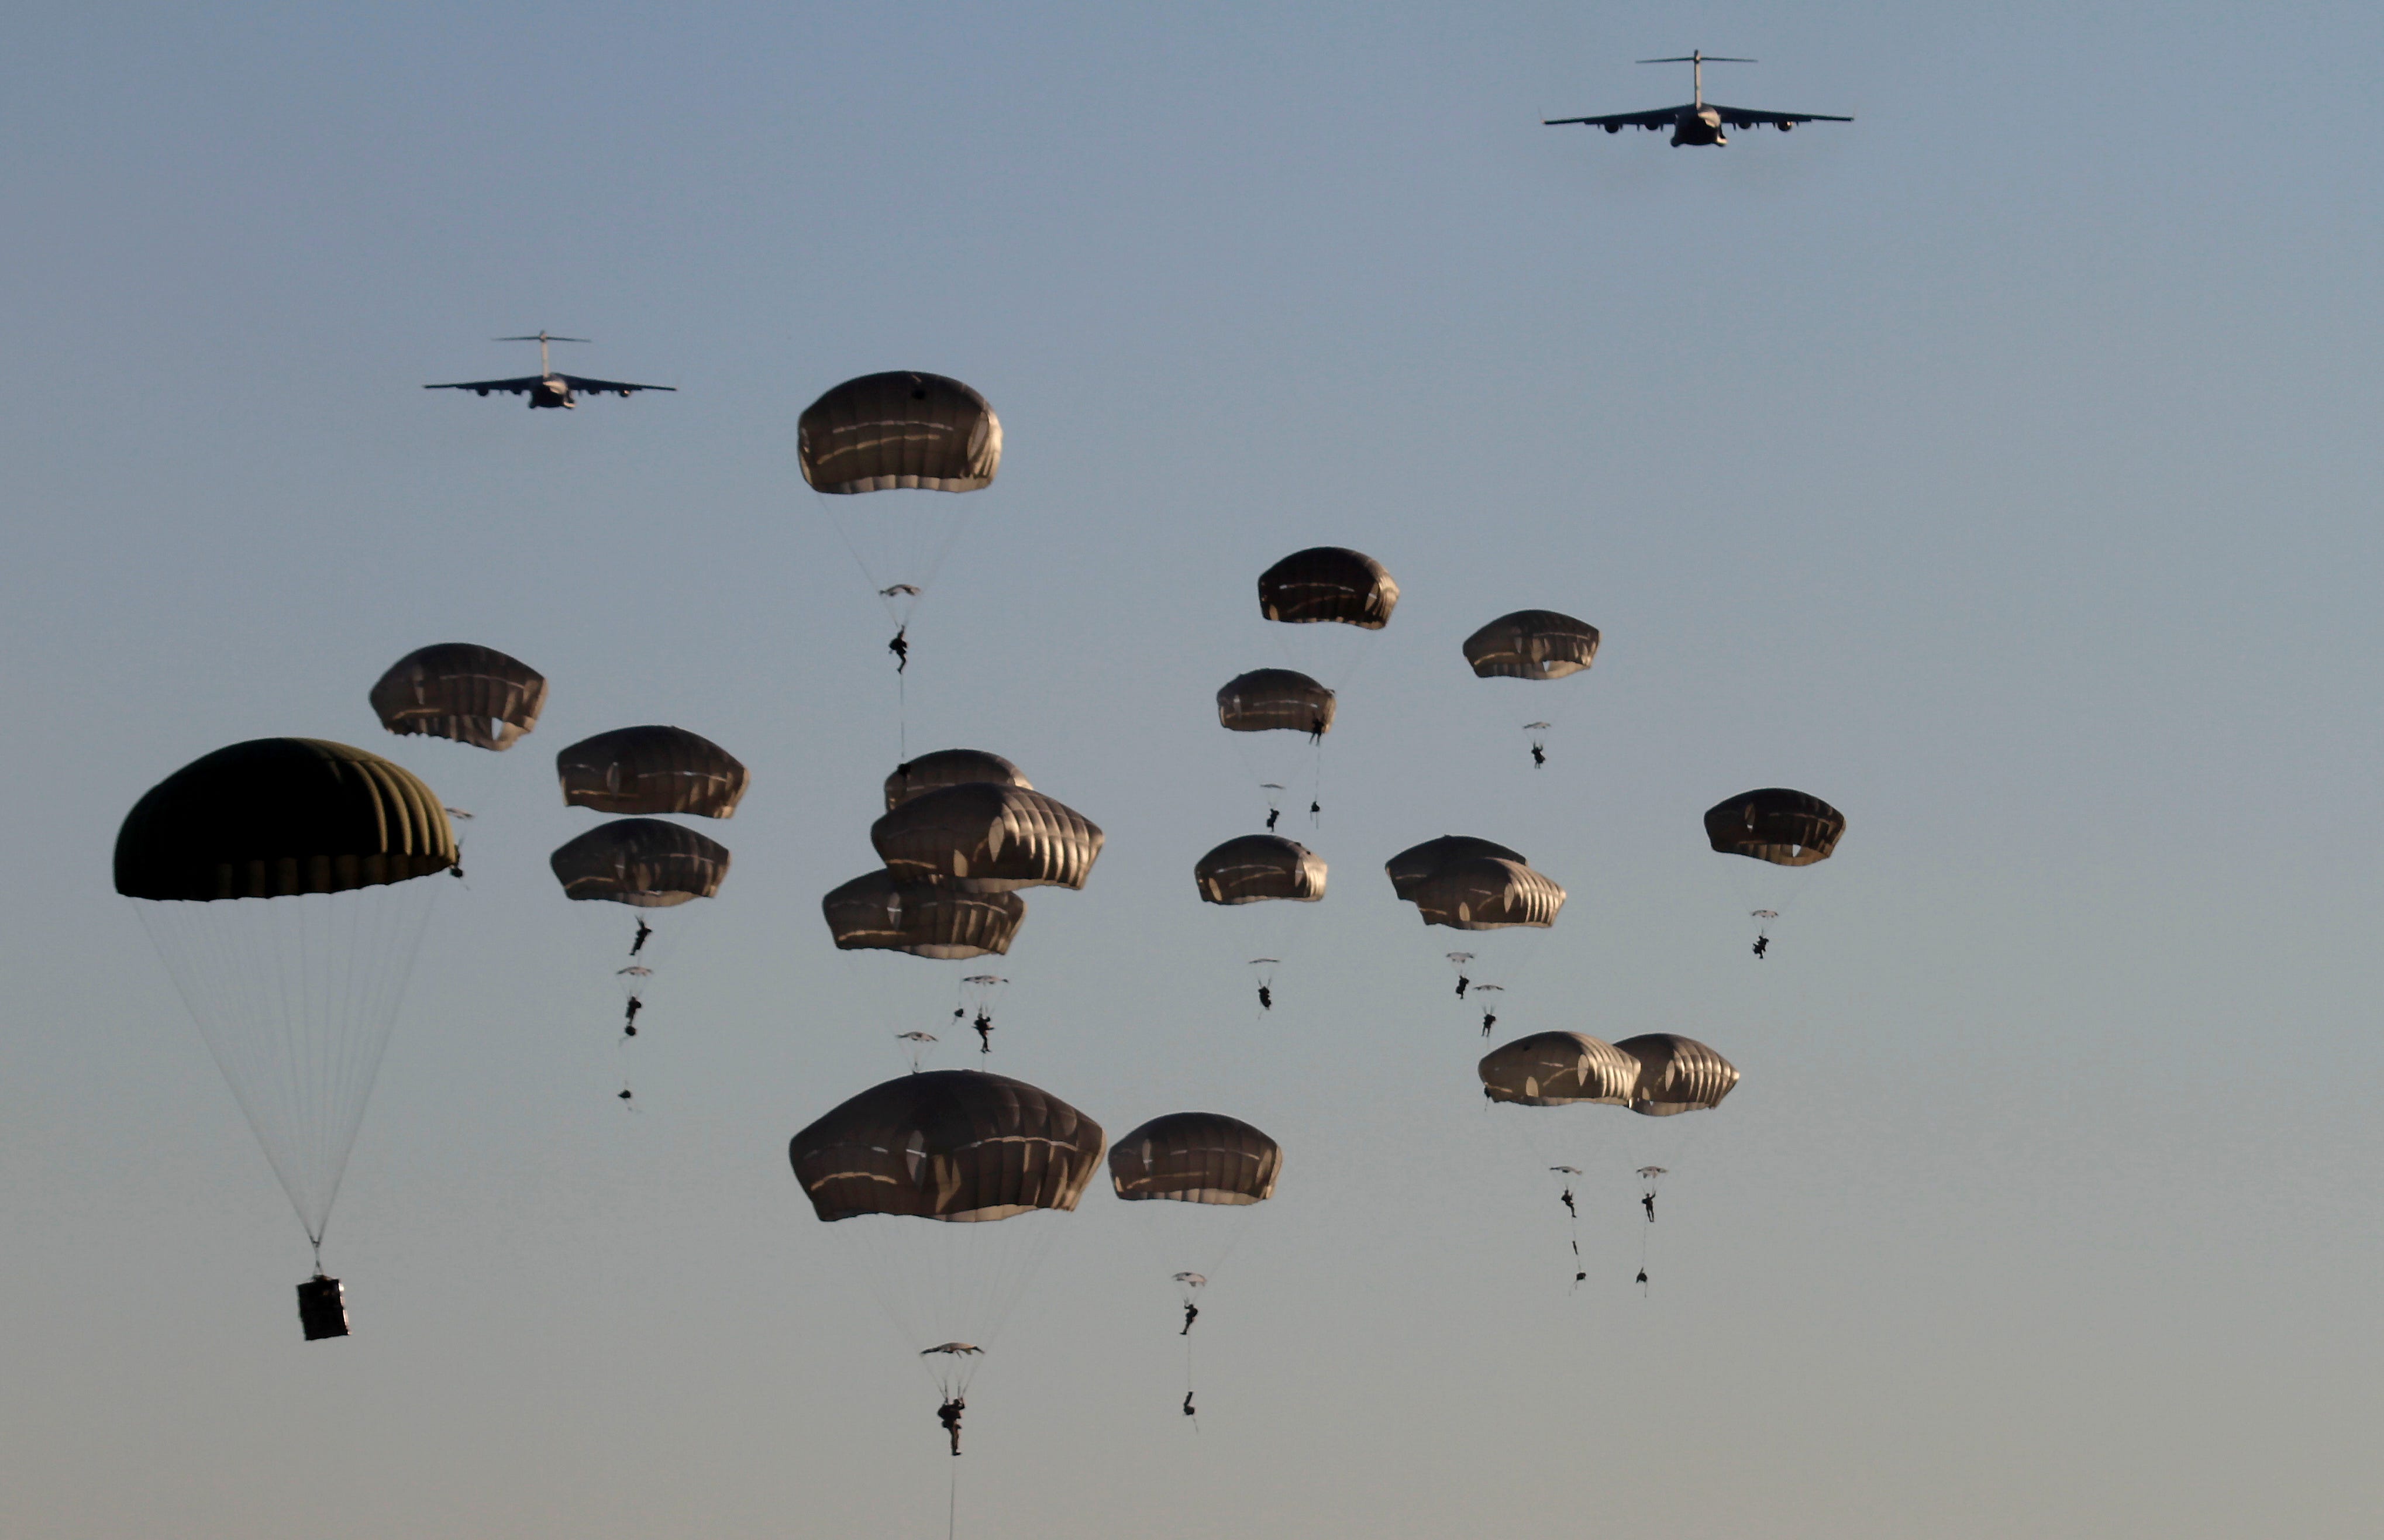 U.S. Army 82nd Airborne Division soldiers jump off a Boeing C-17 Globemaster III military transport aircraft during the Saber Strike 18 military exercise in Adazi Military Base, Latvia. The multinational exercise, organized by the Command of the U.S.